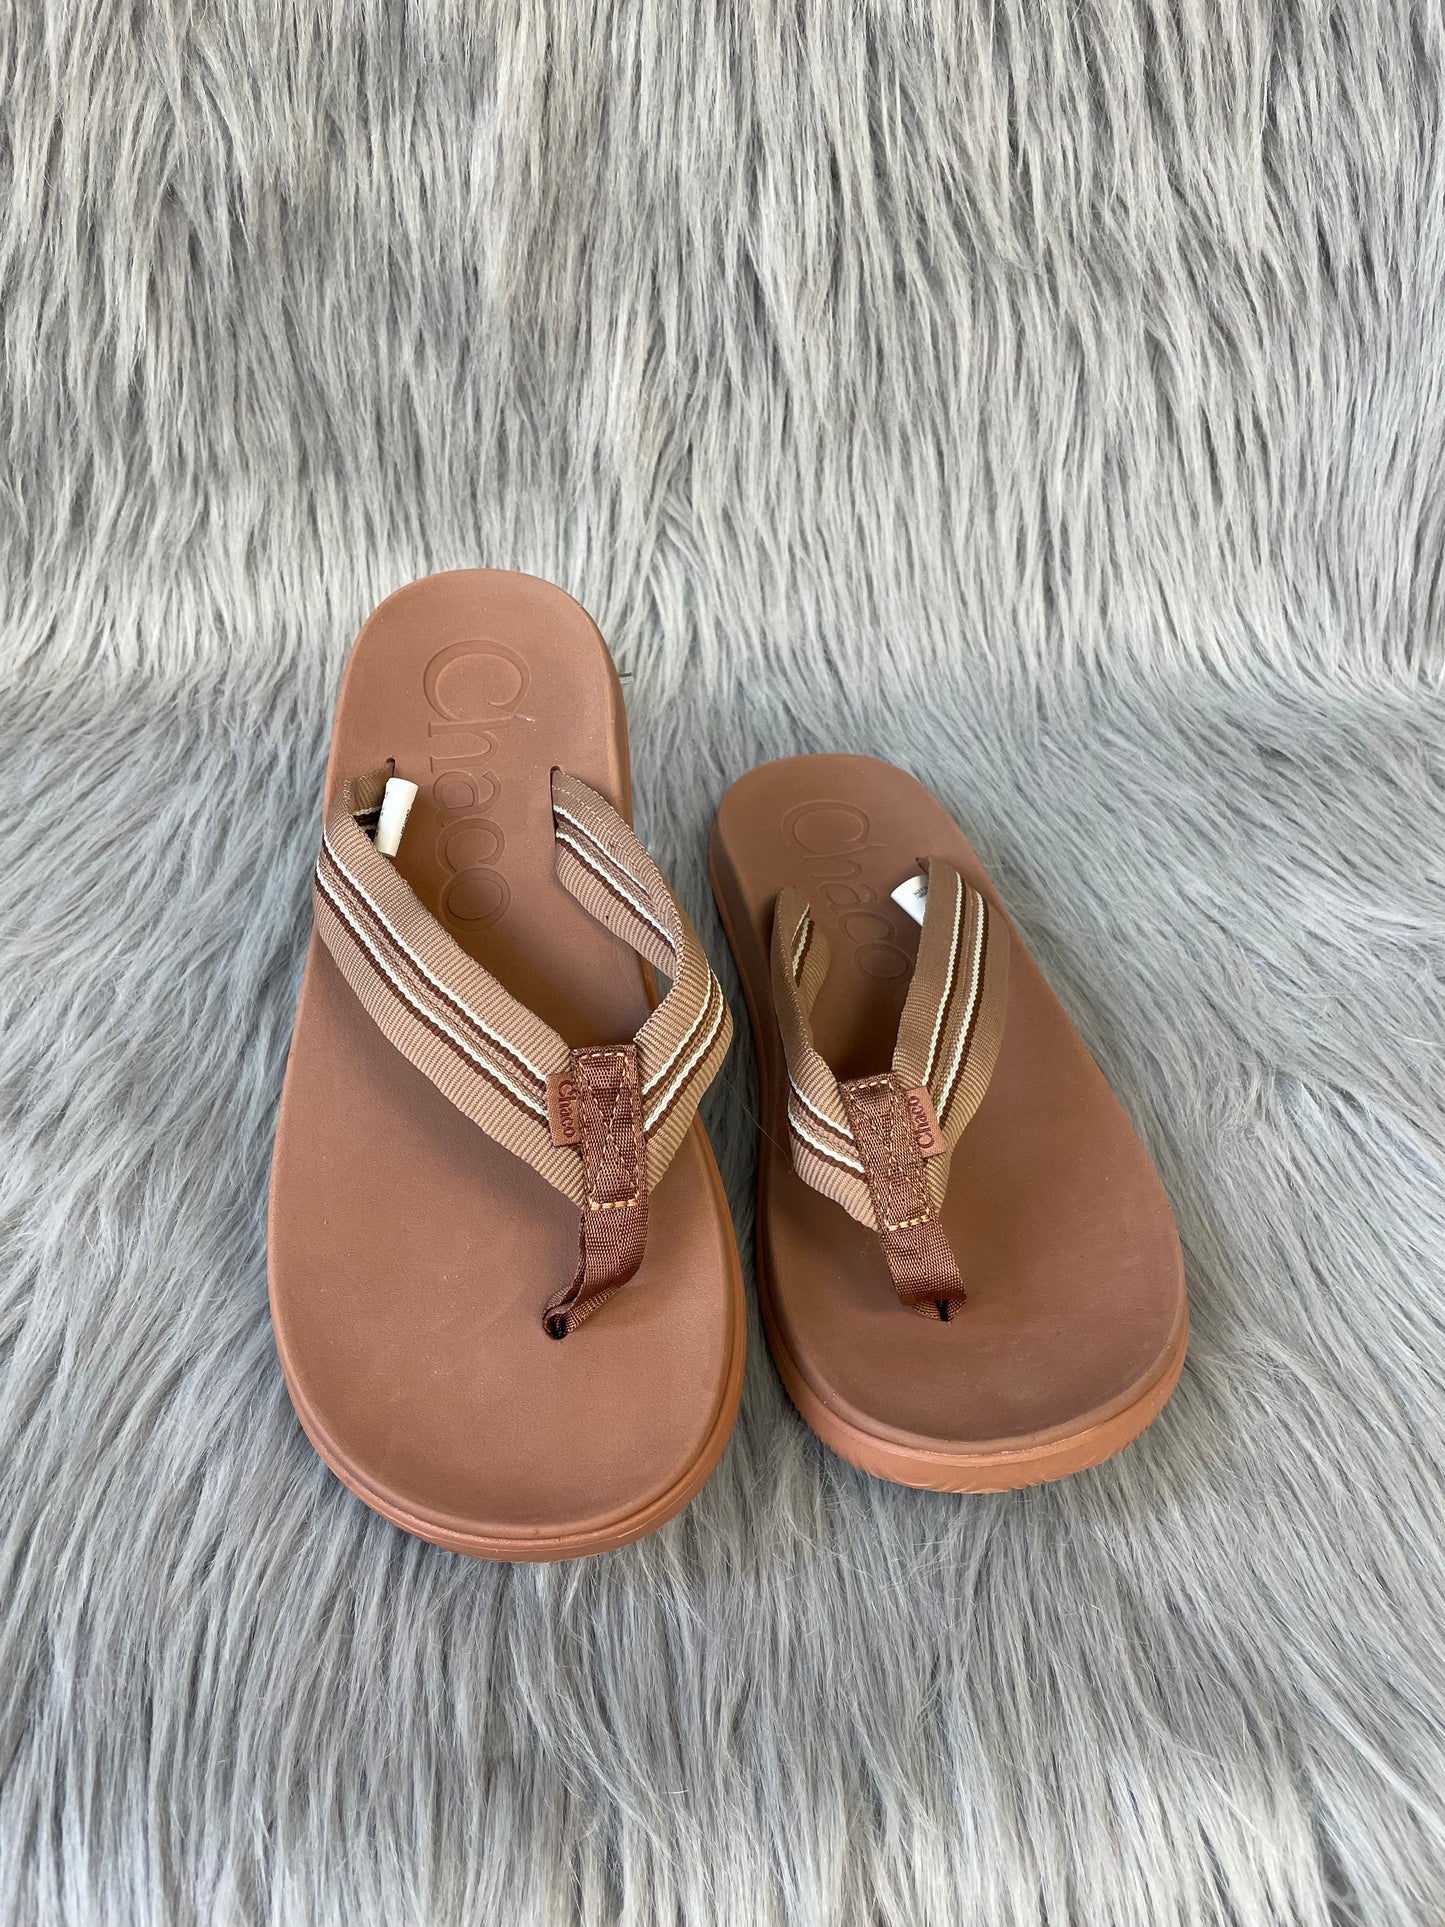 Sandals Flip Flops By Chacos  Size: 9